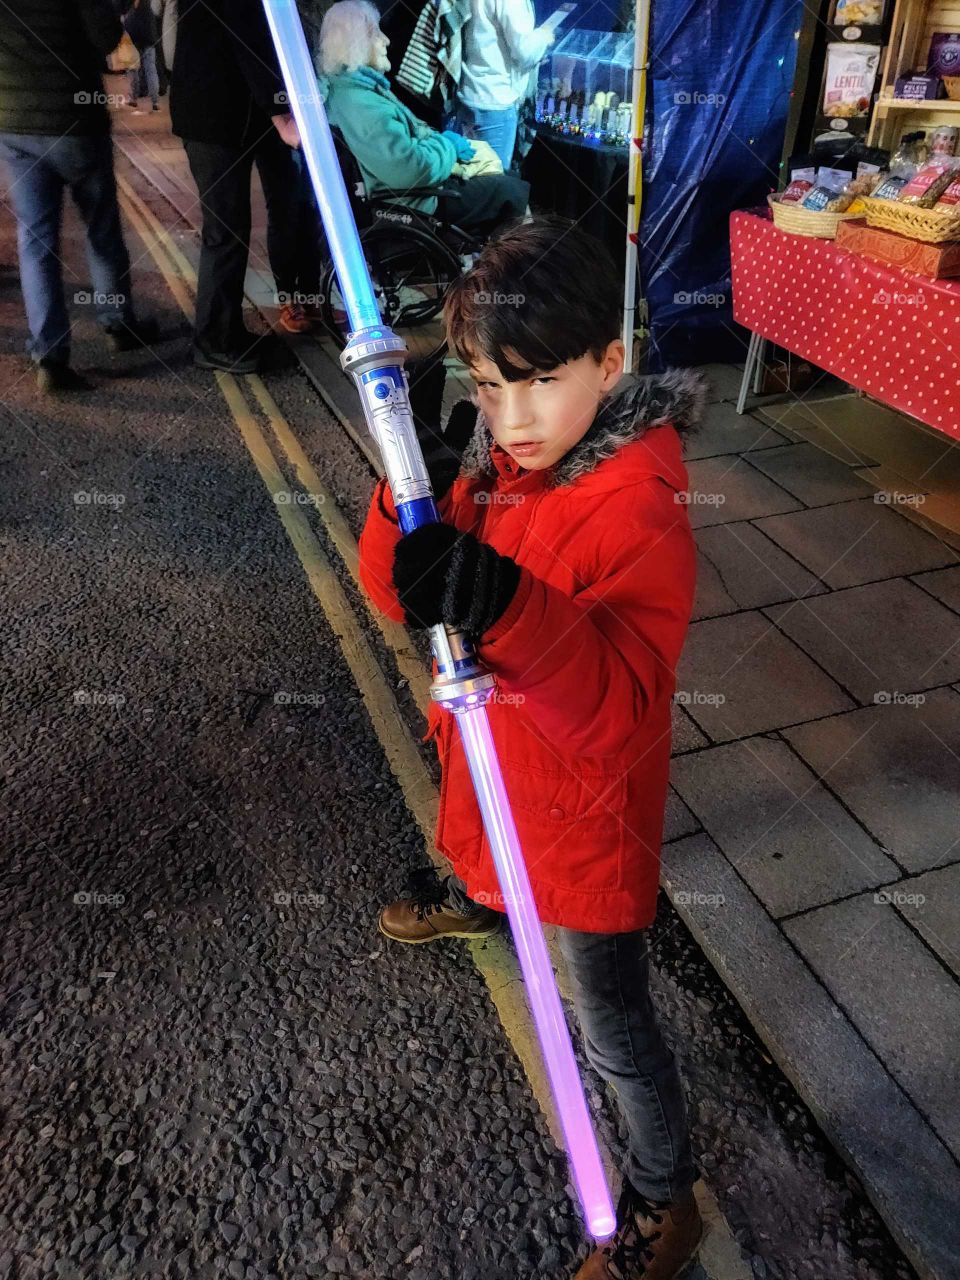 Little boy..very serious about his light sabre